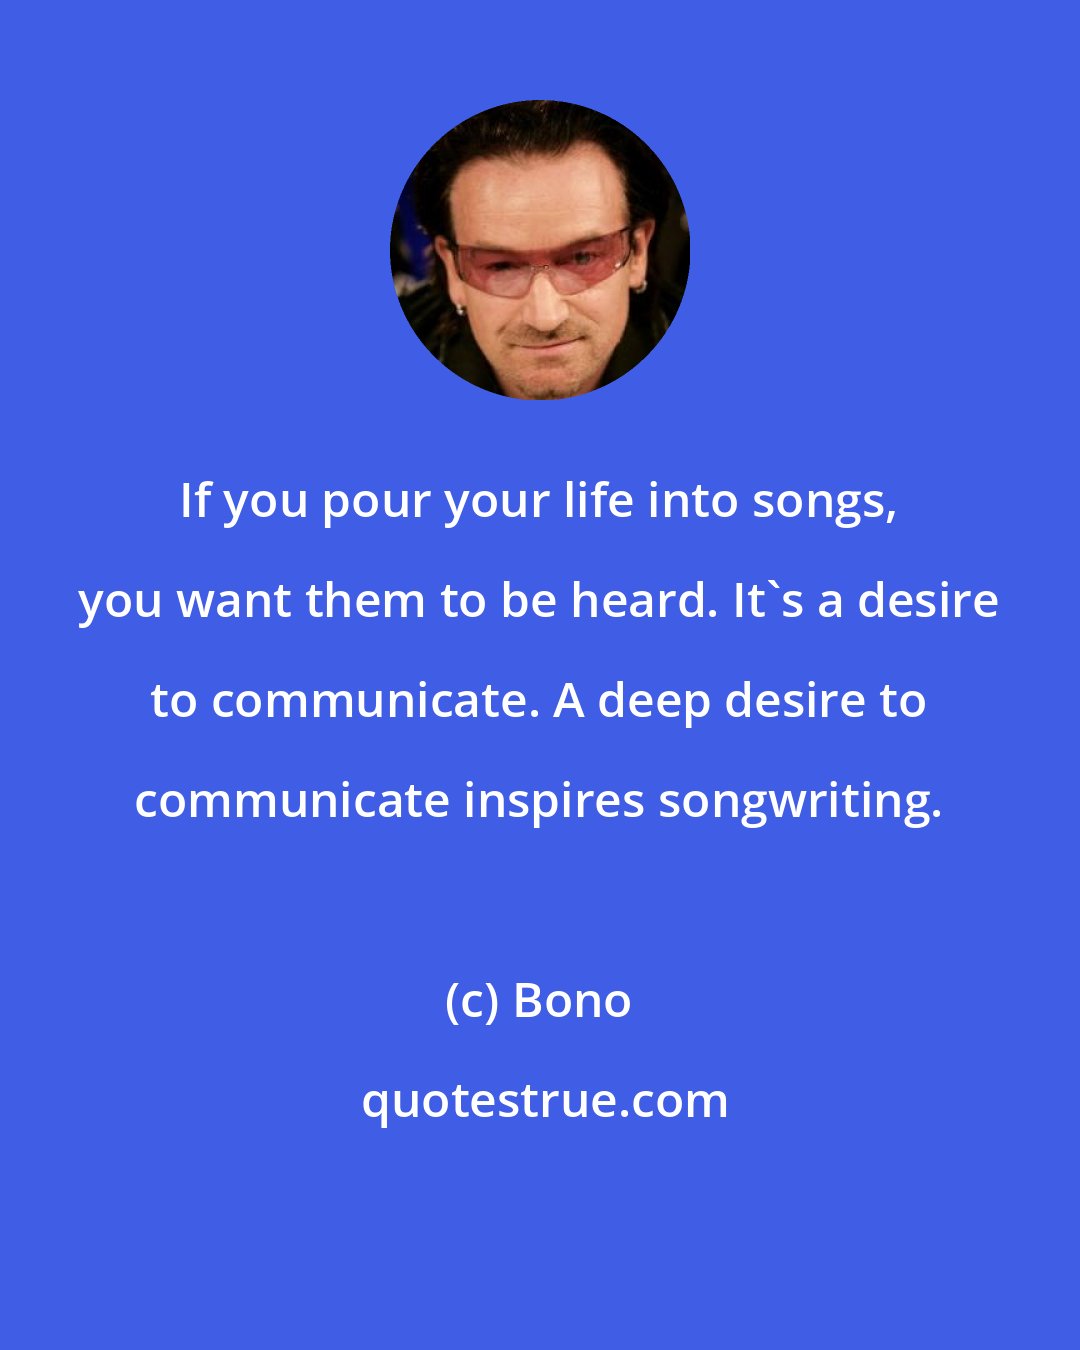 Bono: If you pour your life into songs, you want them to be heard. It's a desire to communicate. A deep desire to communicate inspires songwriting.